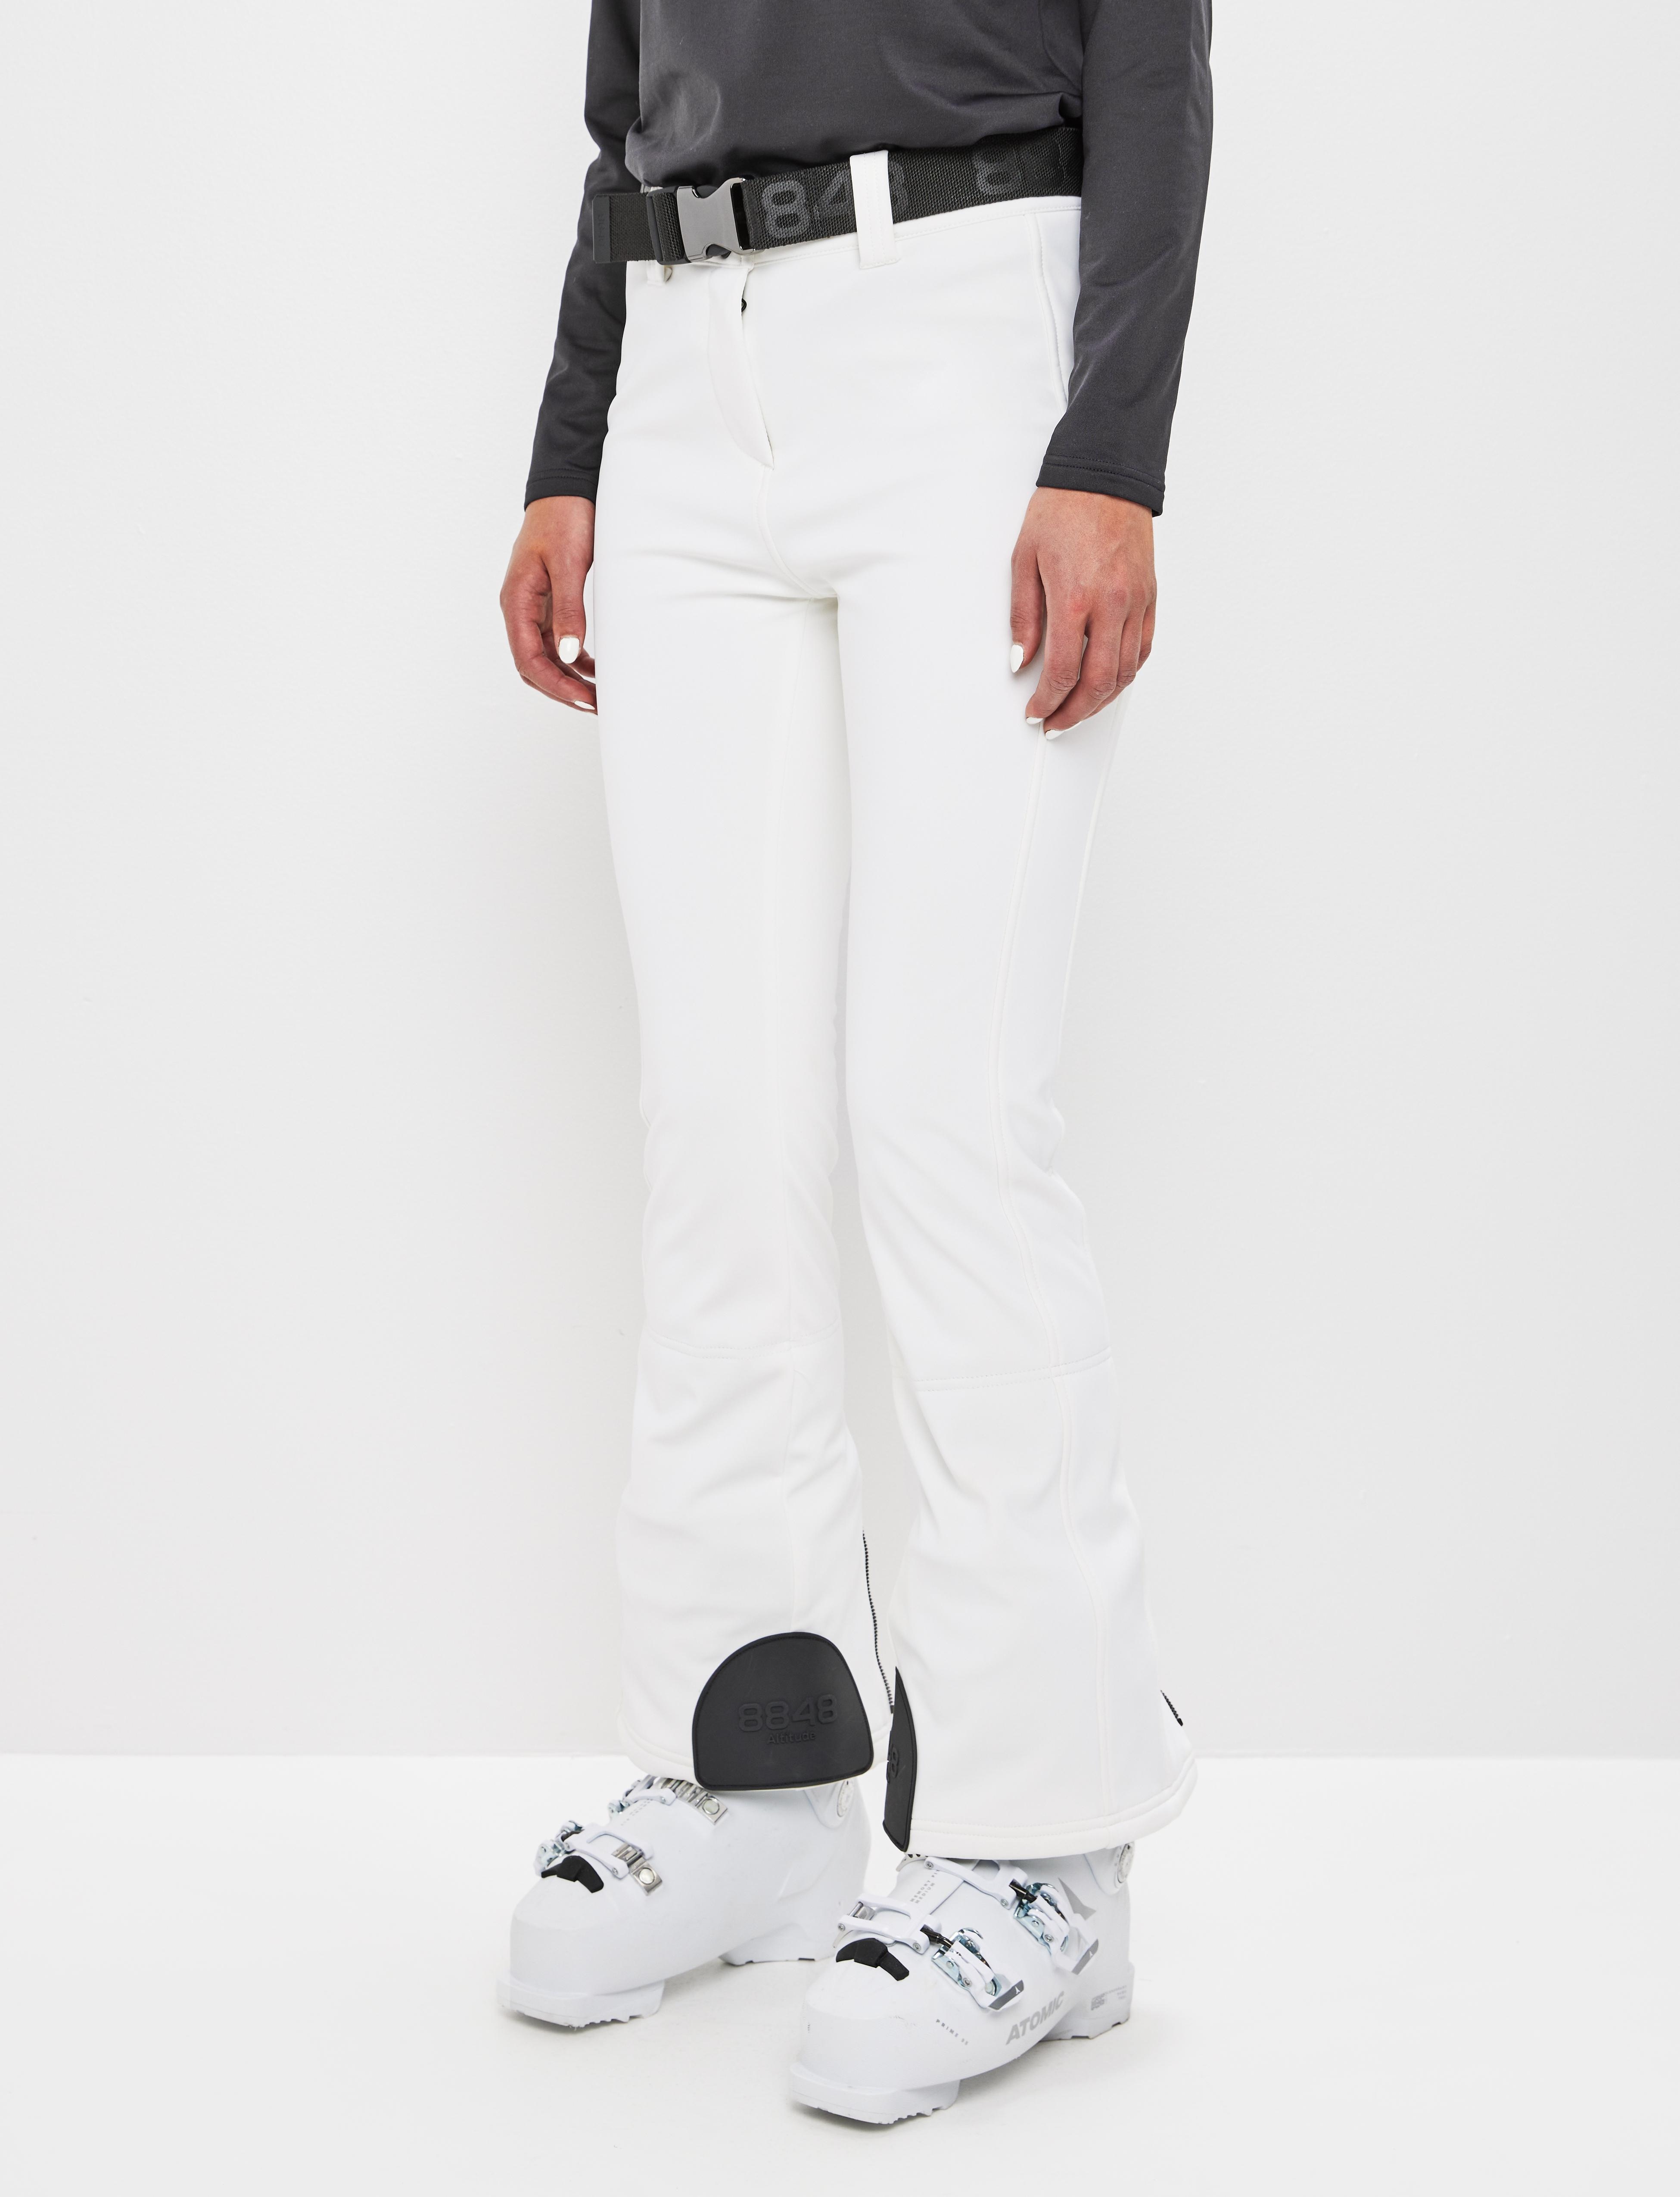 Skinny Ski Pants for Women - Up to 83% off